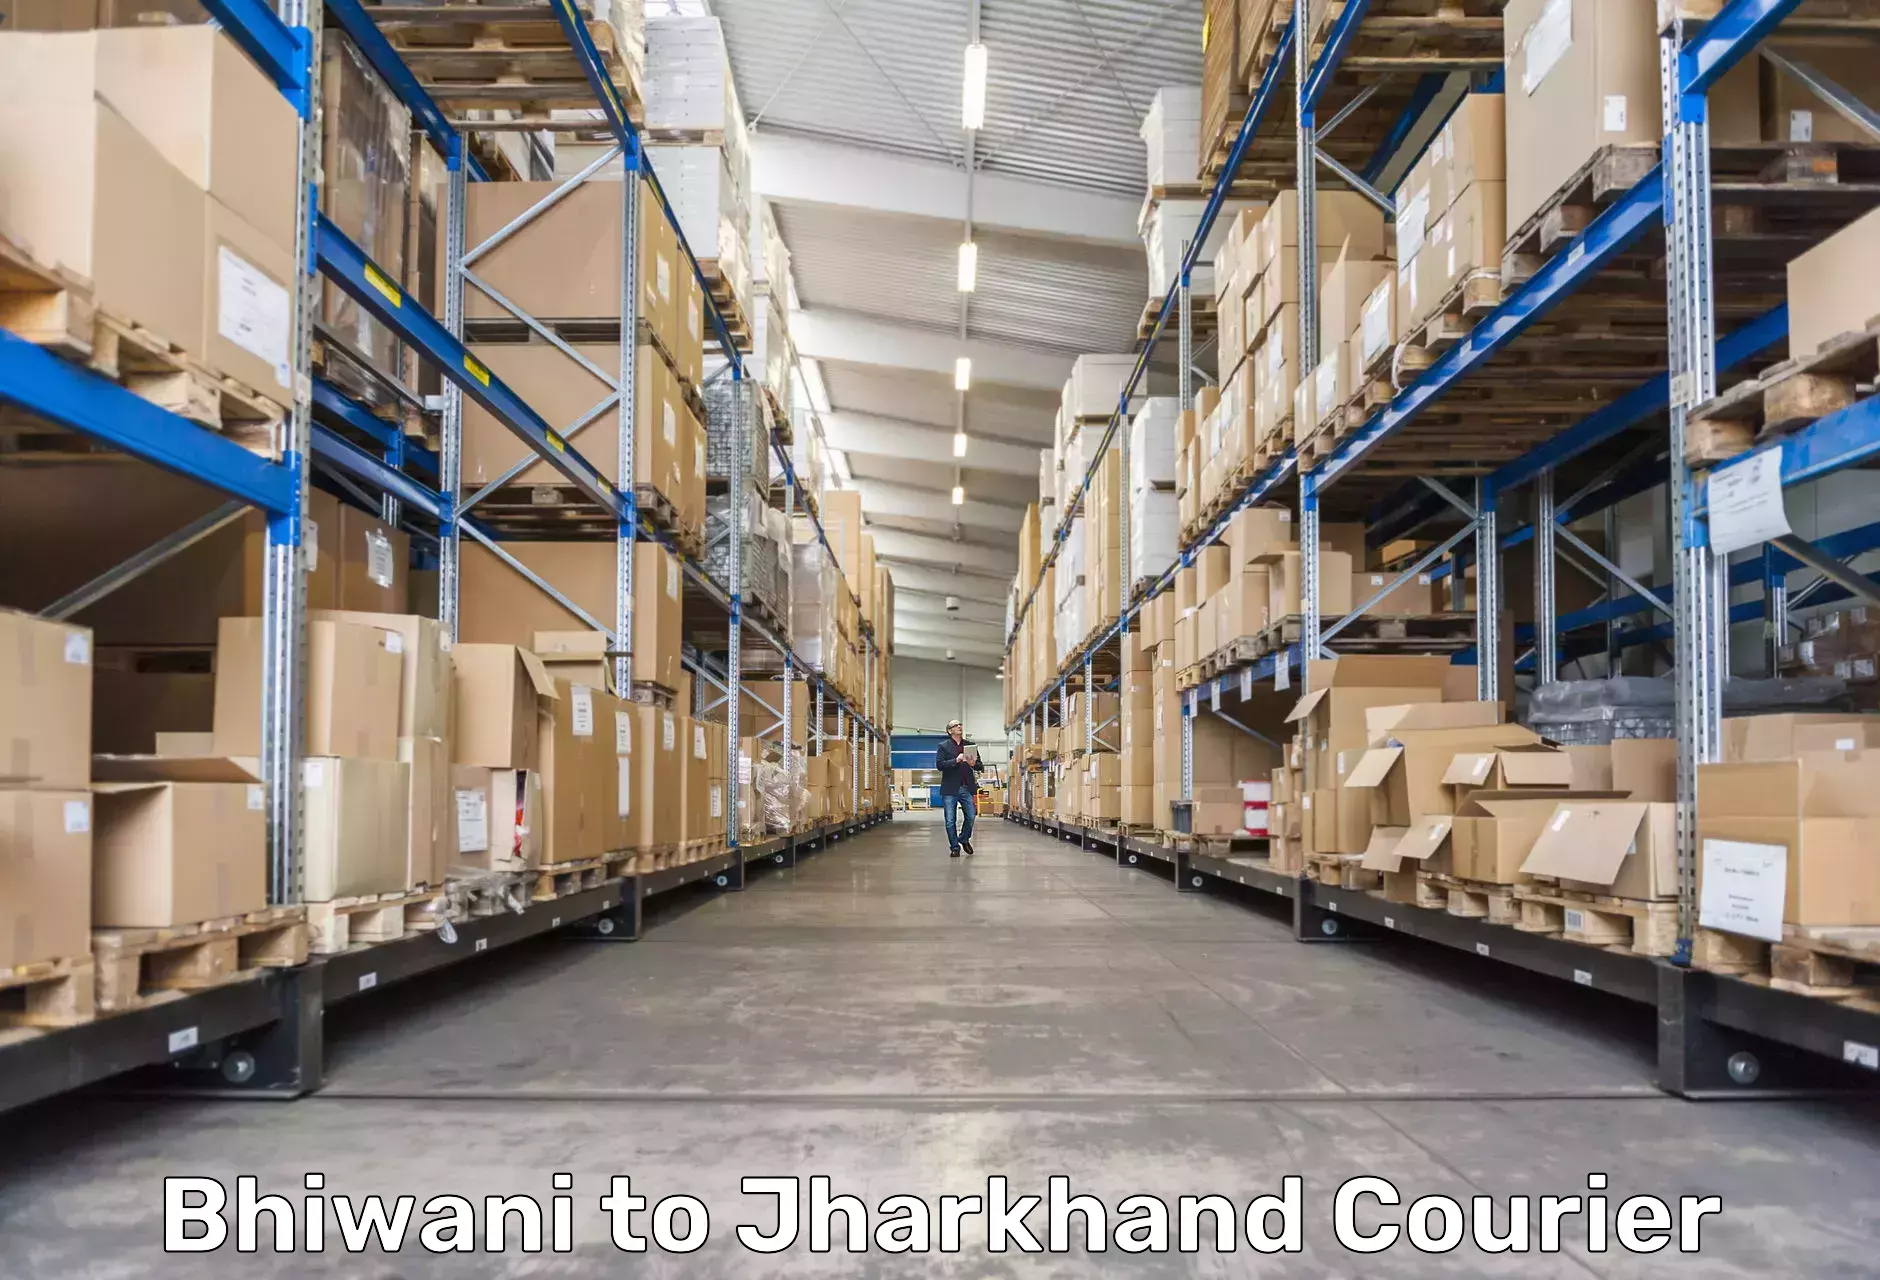 Customer-focused courier Bhiwani to Jharkhand